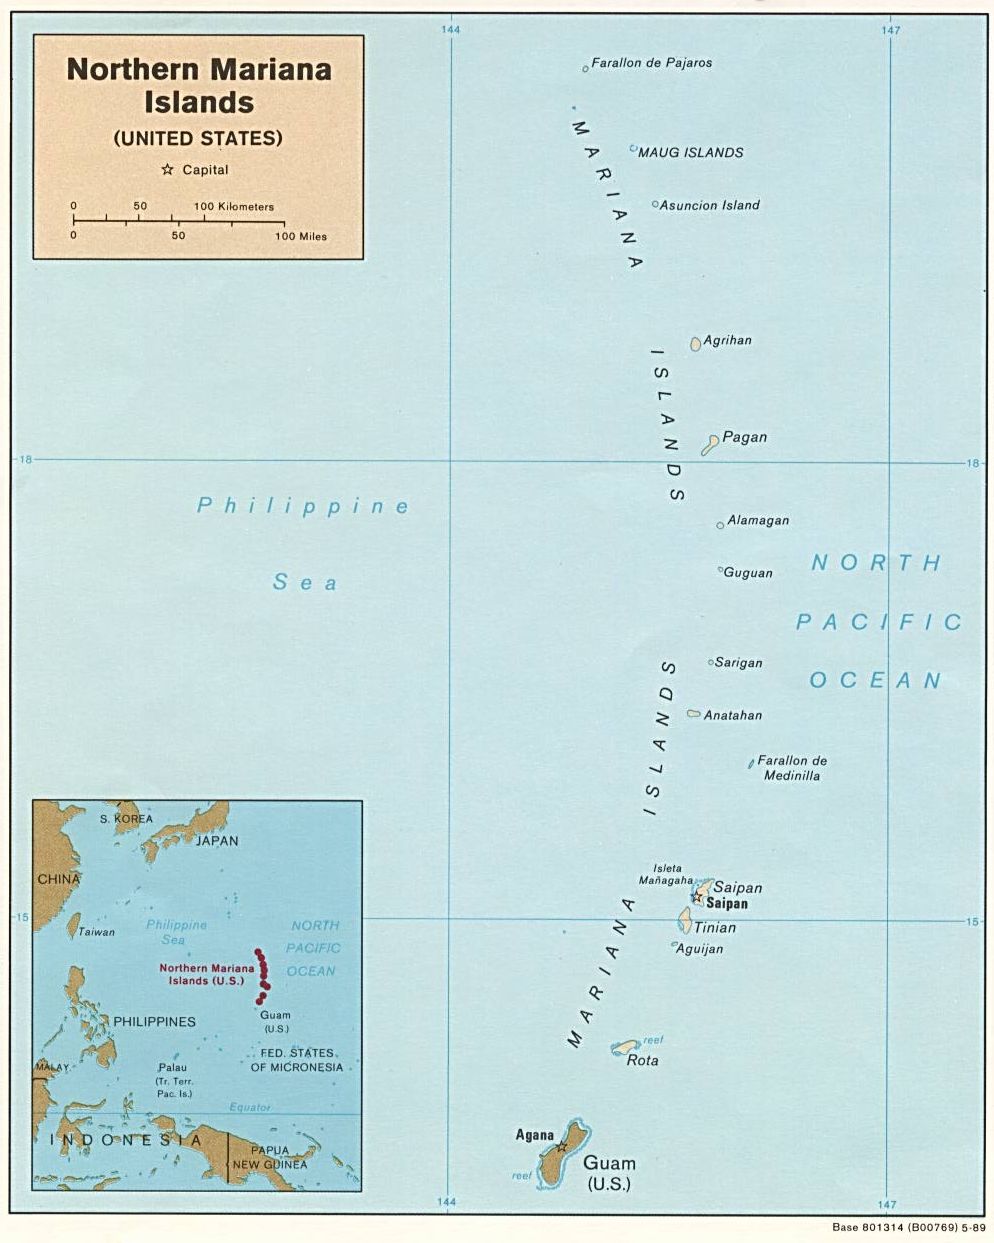 Map of the Commonwealth of the Northern Mariana Islands (Political), 1989. Courtesy of, The World Factbook (http://cia.gov/cia/publications/factbook) or CIA Maps and Publications Released to the Public (http://www.cia.gov/cia/publications/mapspub), Central Intelligence Agency (CIA), Government of the United States of America (USA); and the Perry-Castaeda Map Collection (http://www.lib.utexas.edu/maps), Perry-Castaeda Library, The General Libraries, University of Texas at Austin, Austin, Texas, USA.